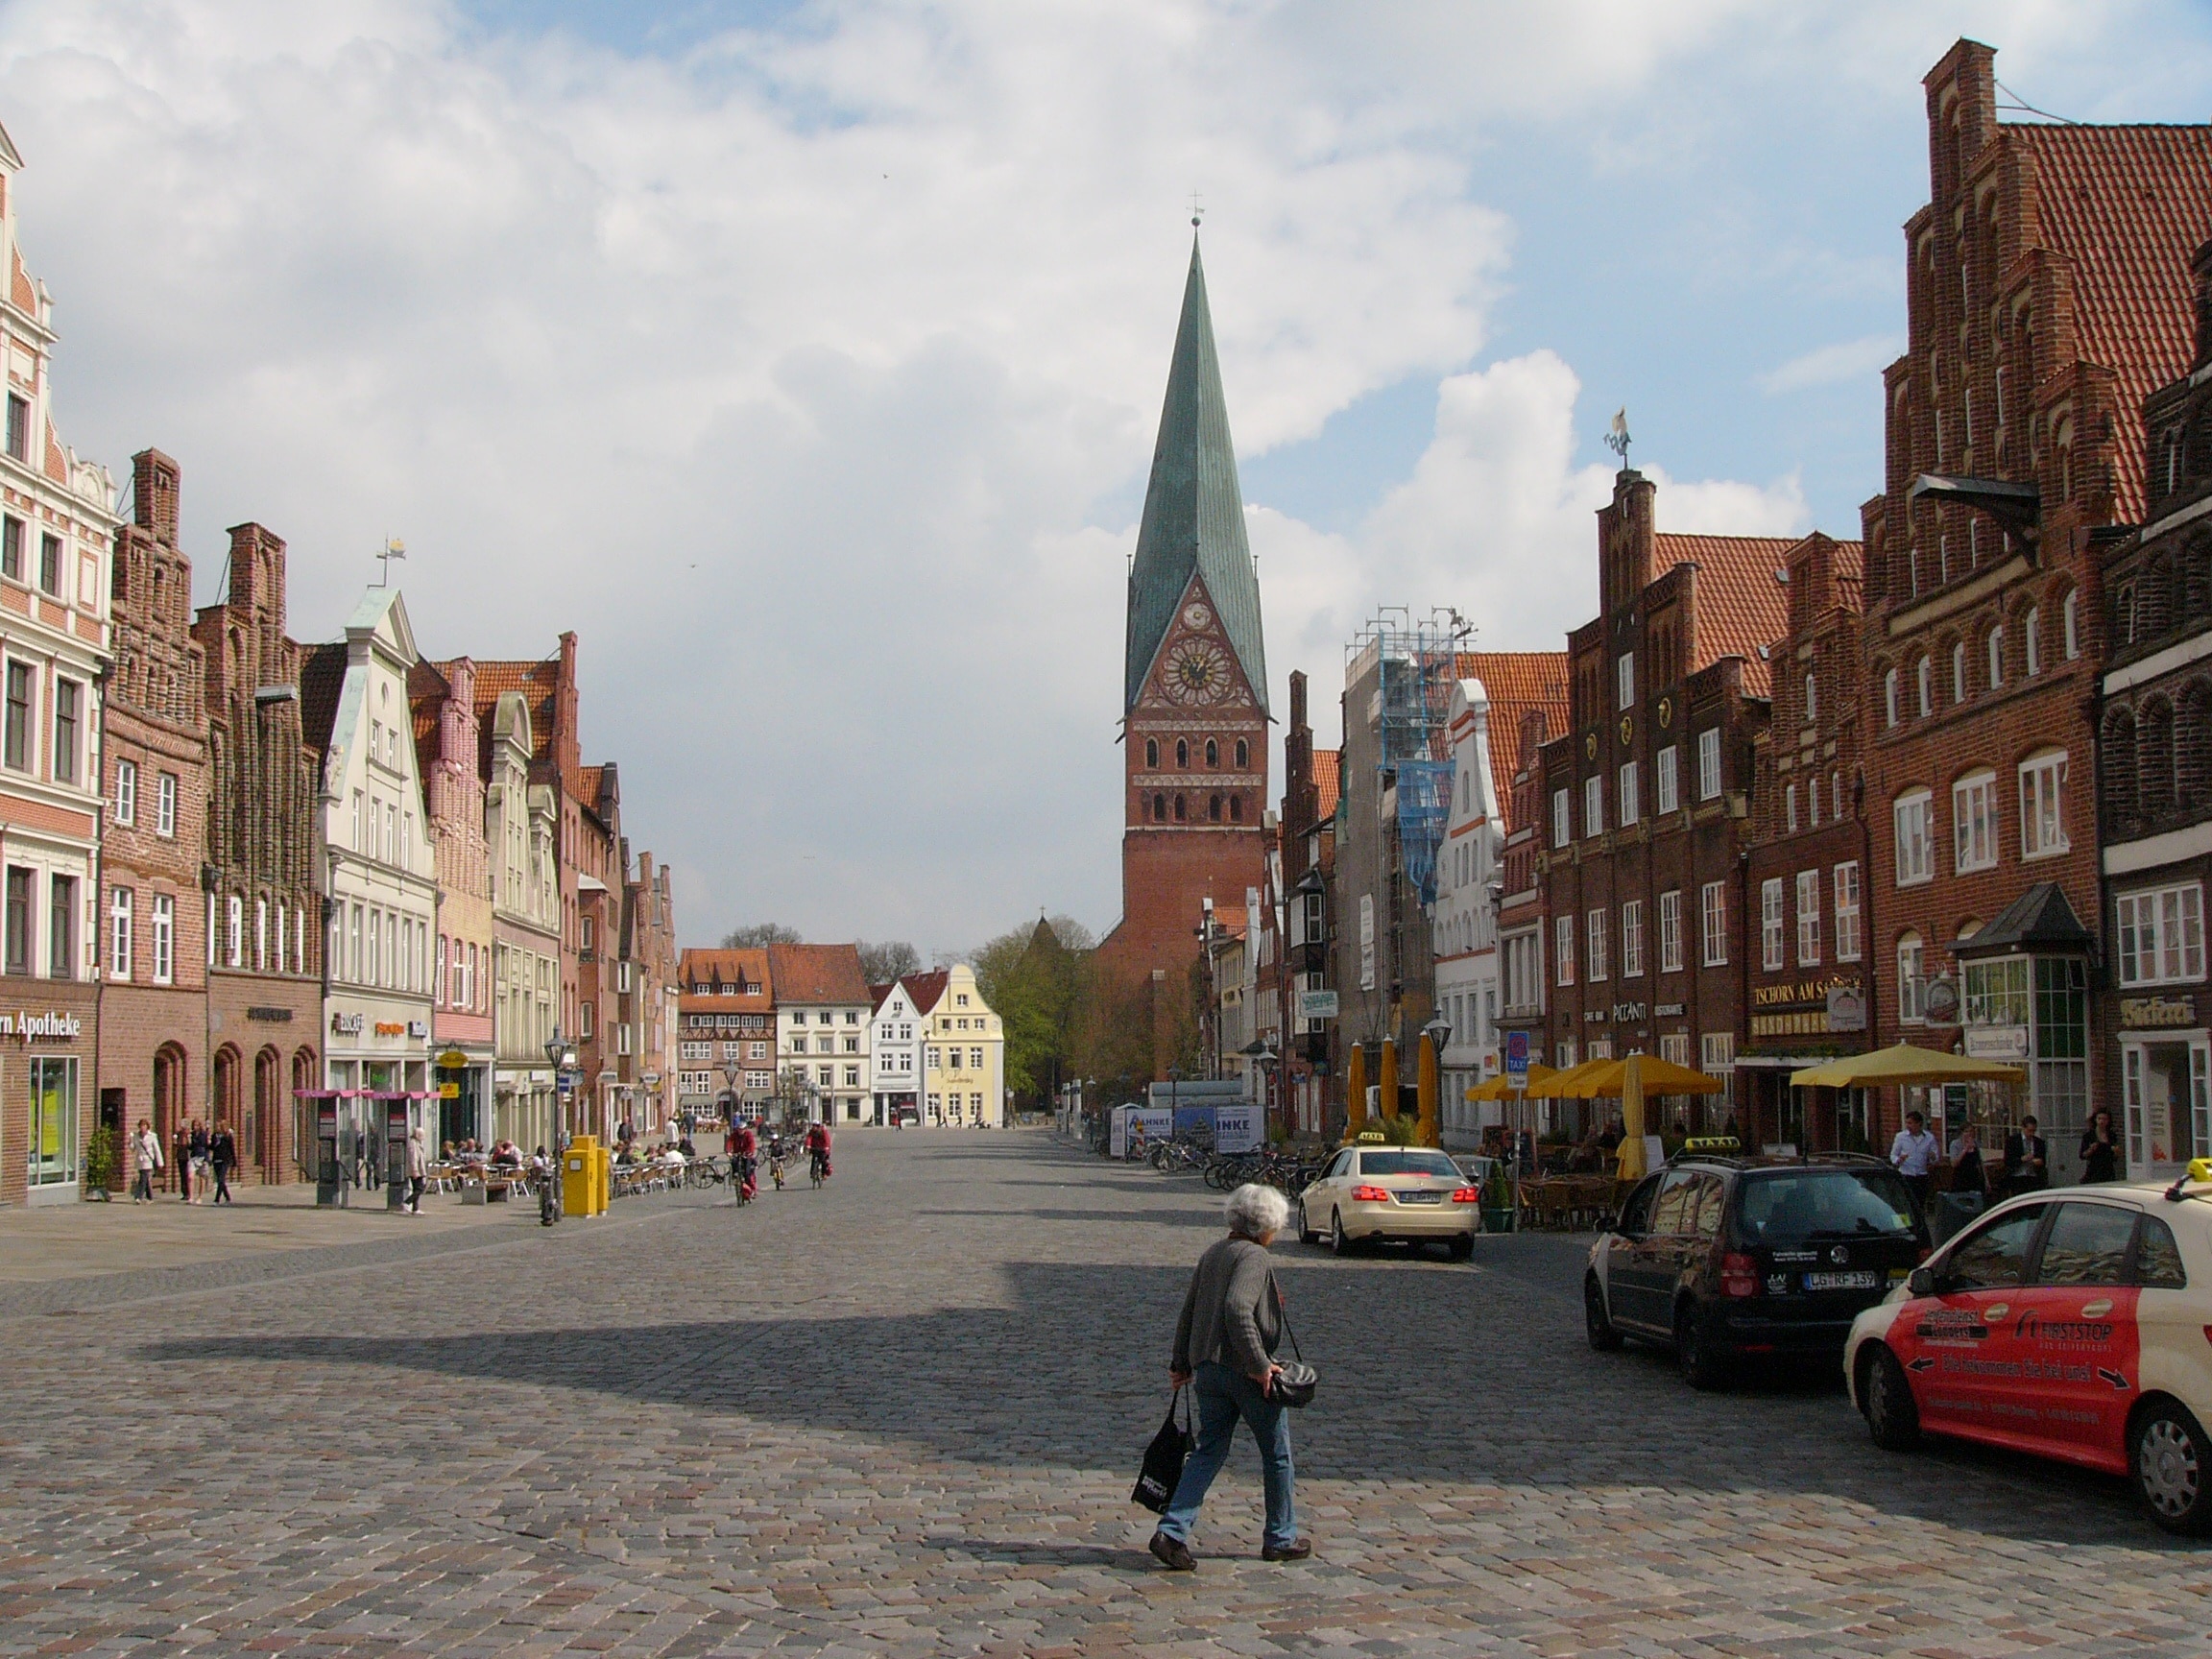 Street Am Sande and view to church St. Johannis in Lüneburg, Germany